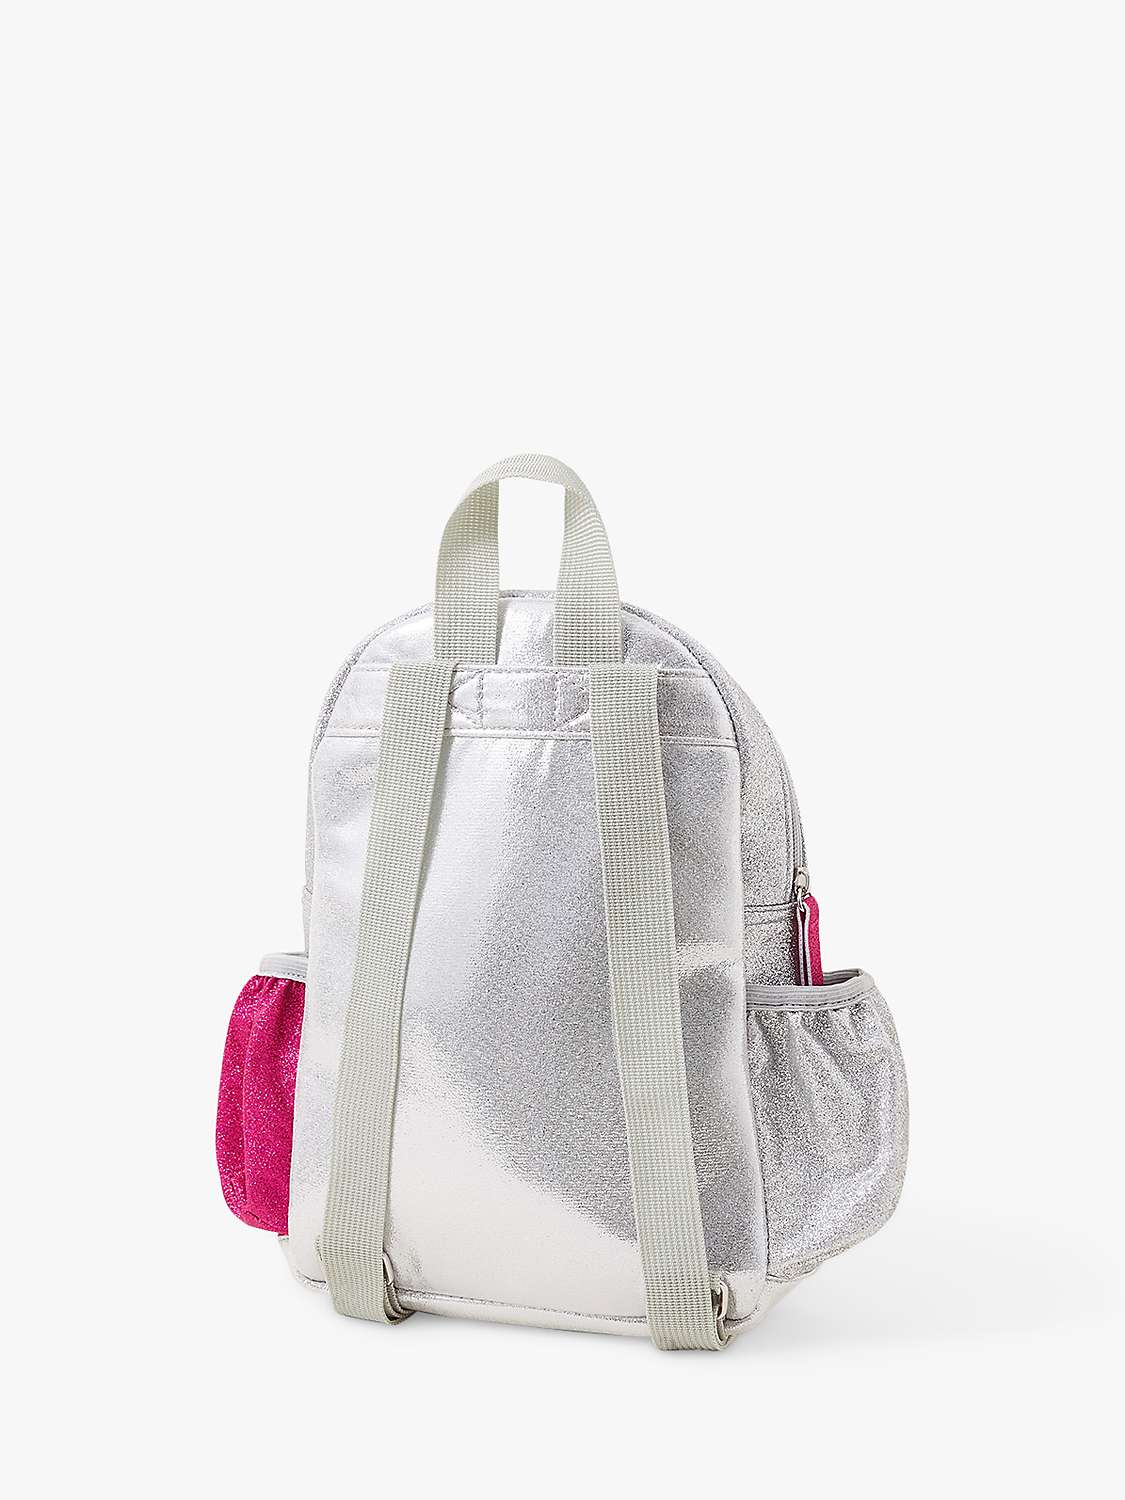 Buy Angels by Accessorize Kids' Glitter Backpack, Silver Online at johnlewis.com